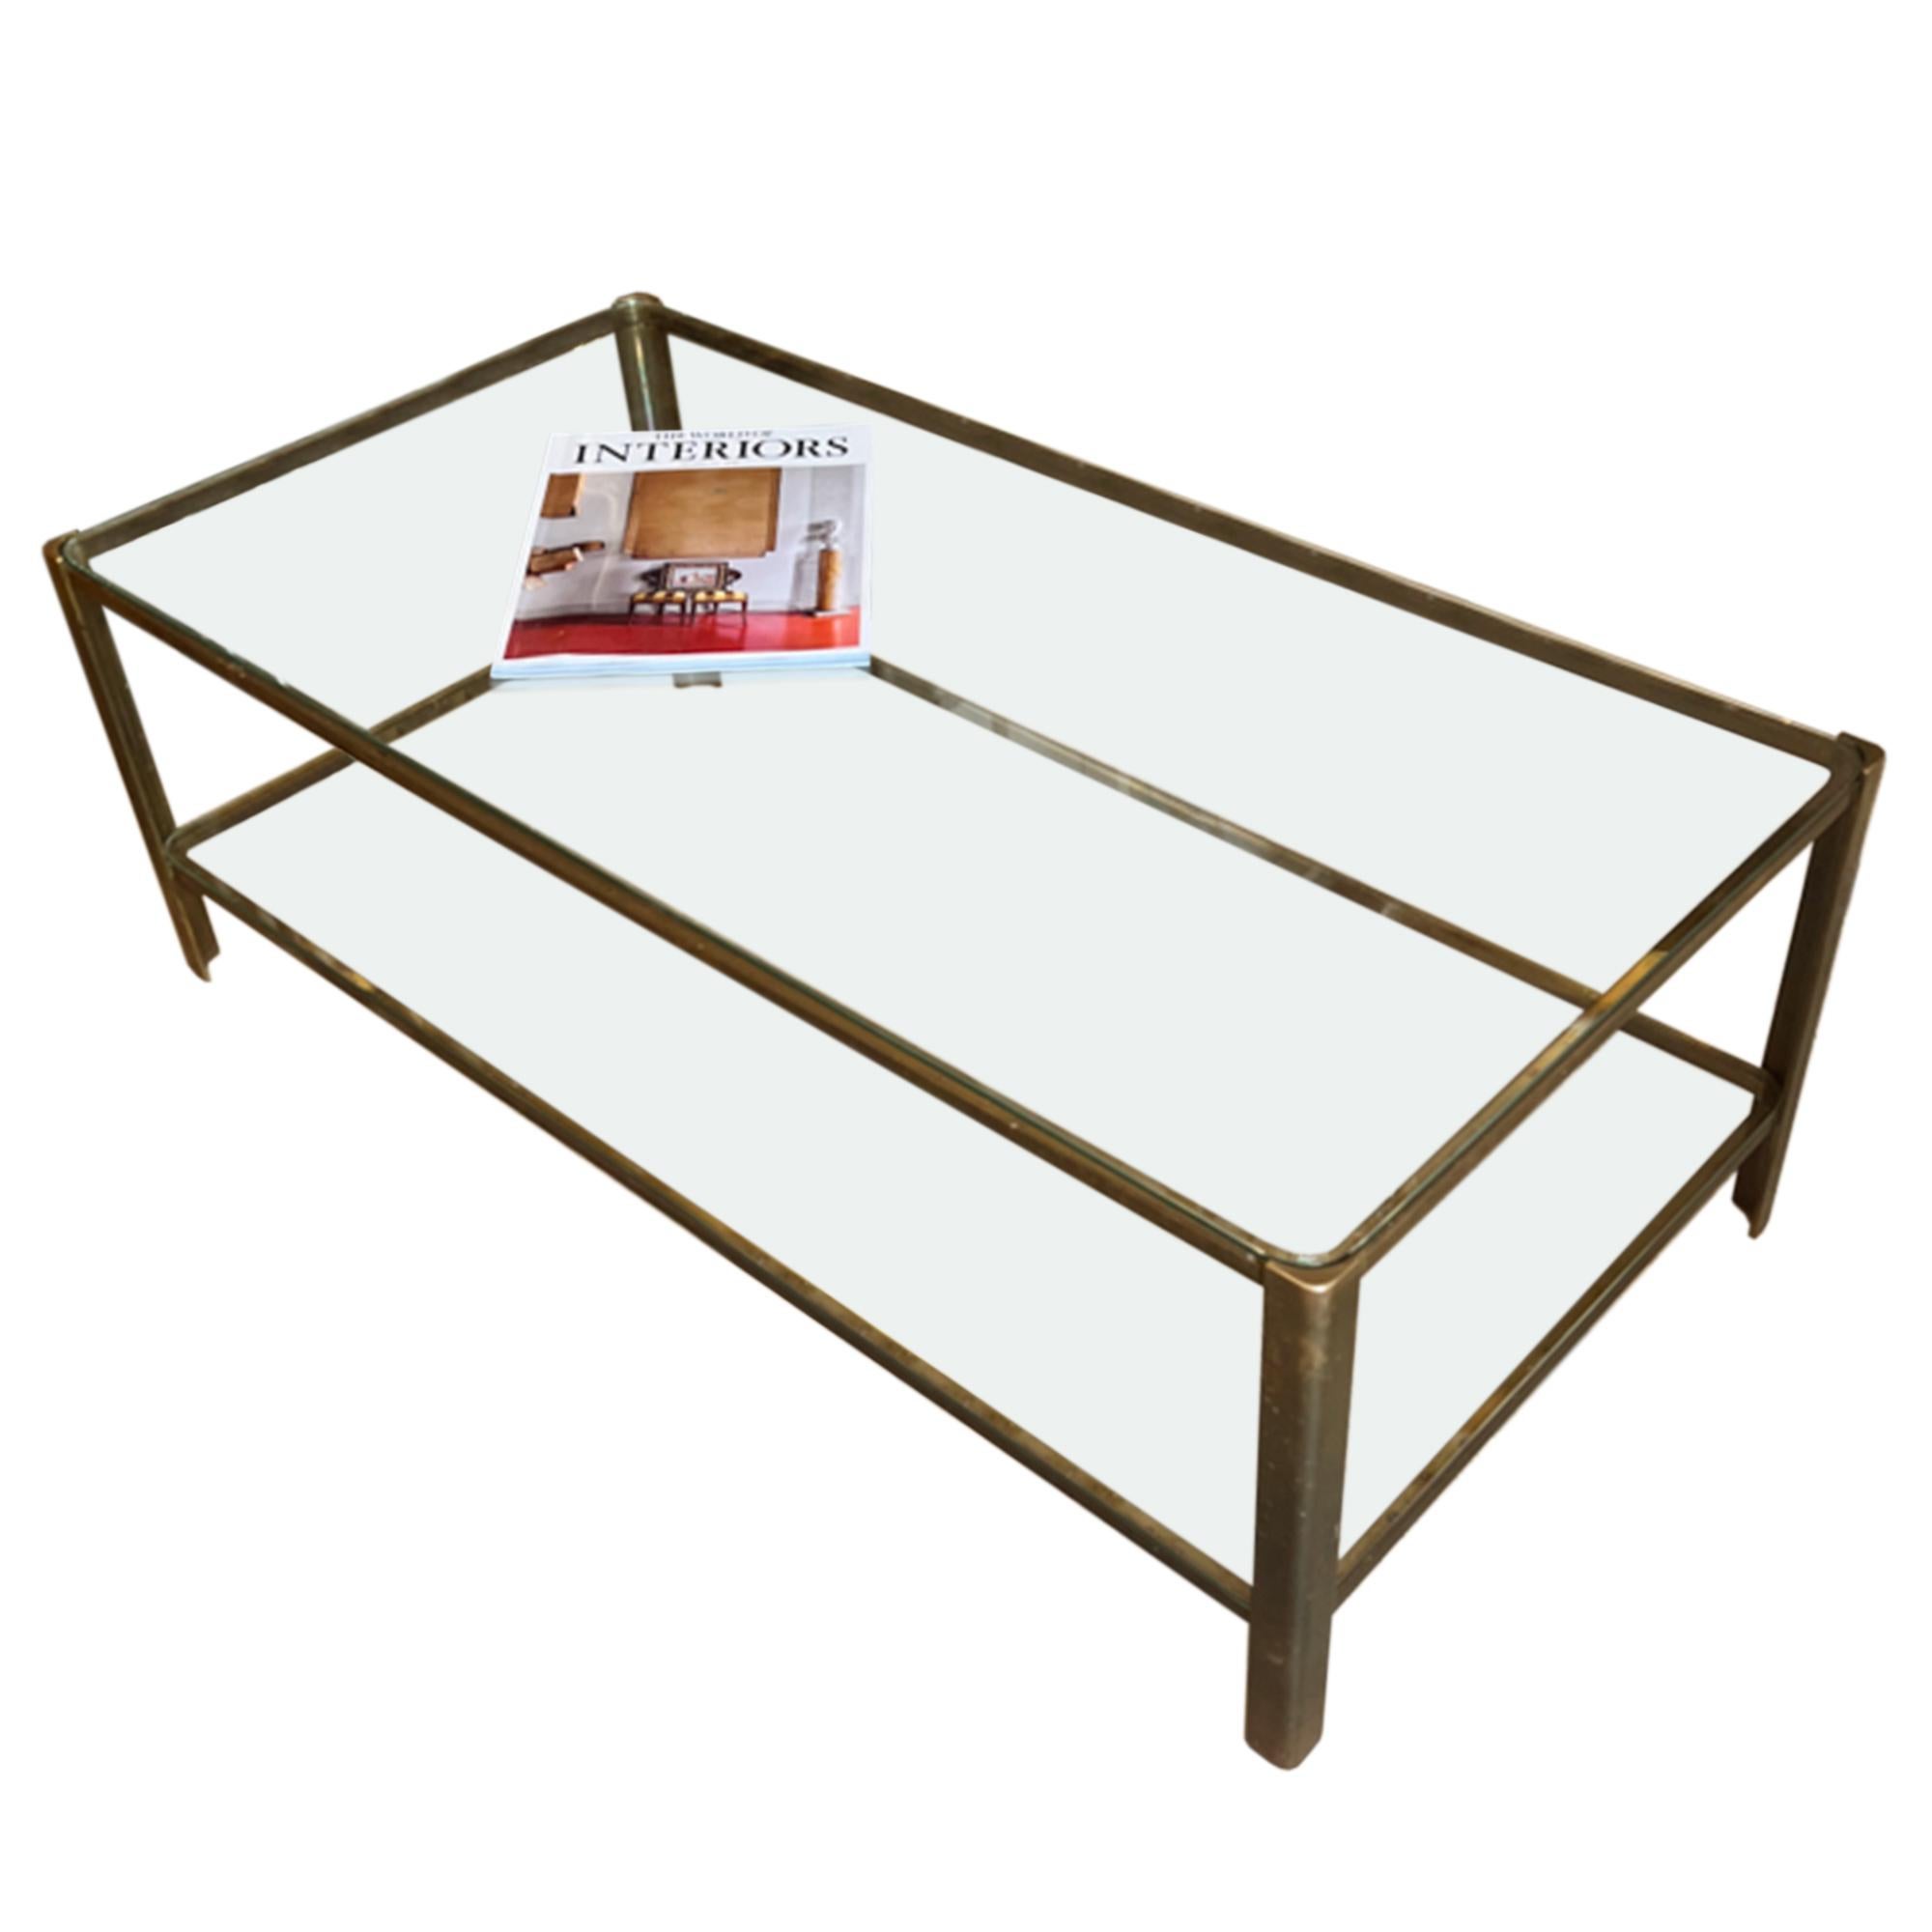 Mid-20th Century Midcentury Coffee Table Designed by Jacques Théophile Lepelletier